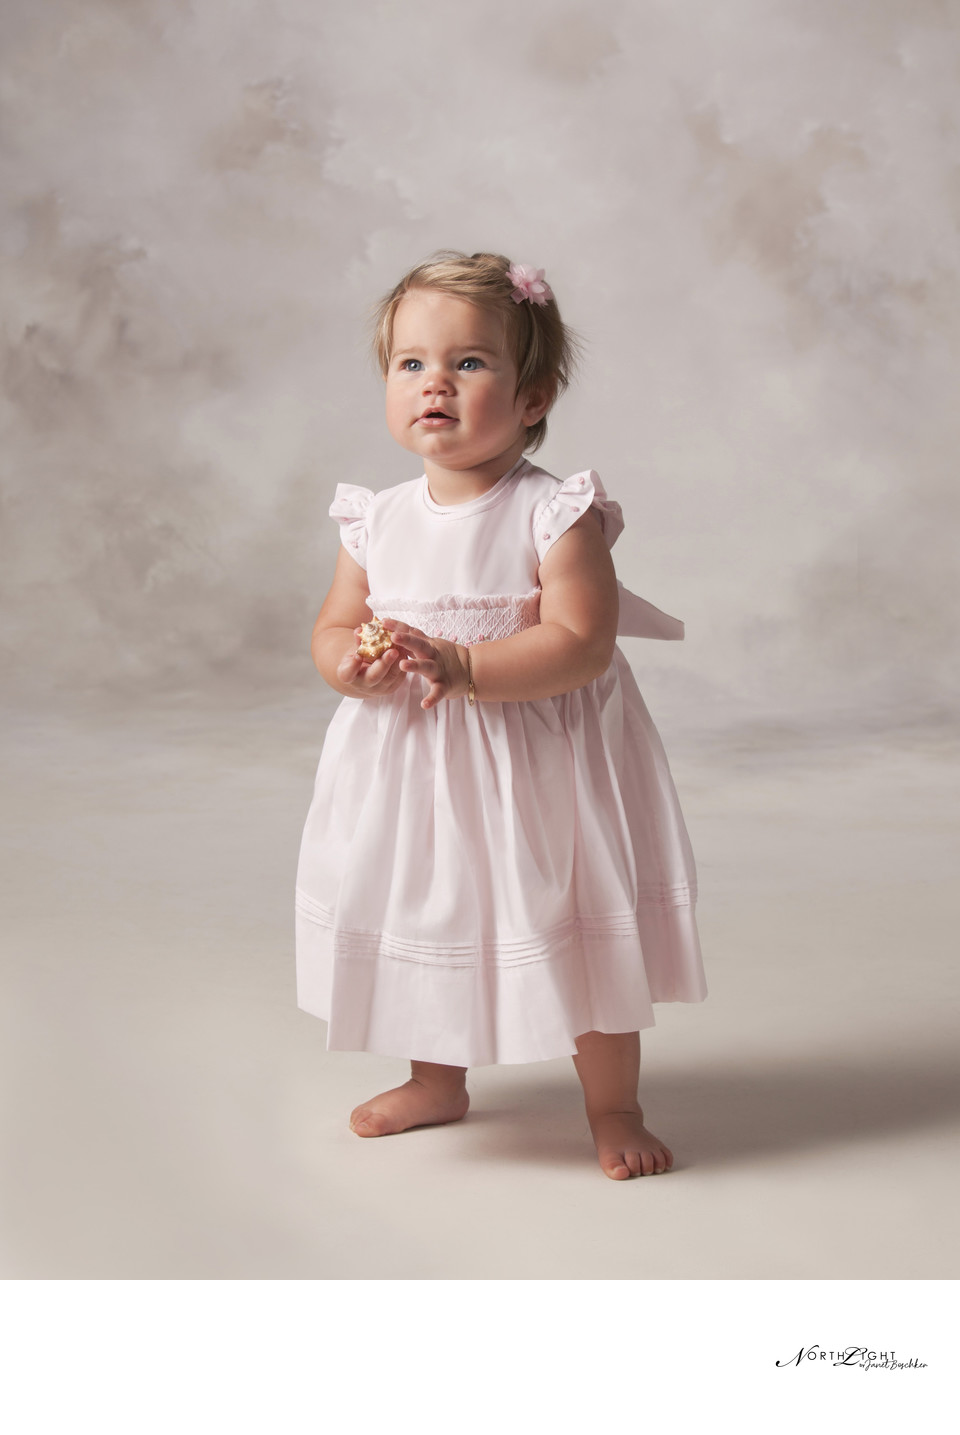 One Year Old Child Studio Photograph | Charlotte